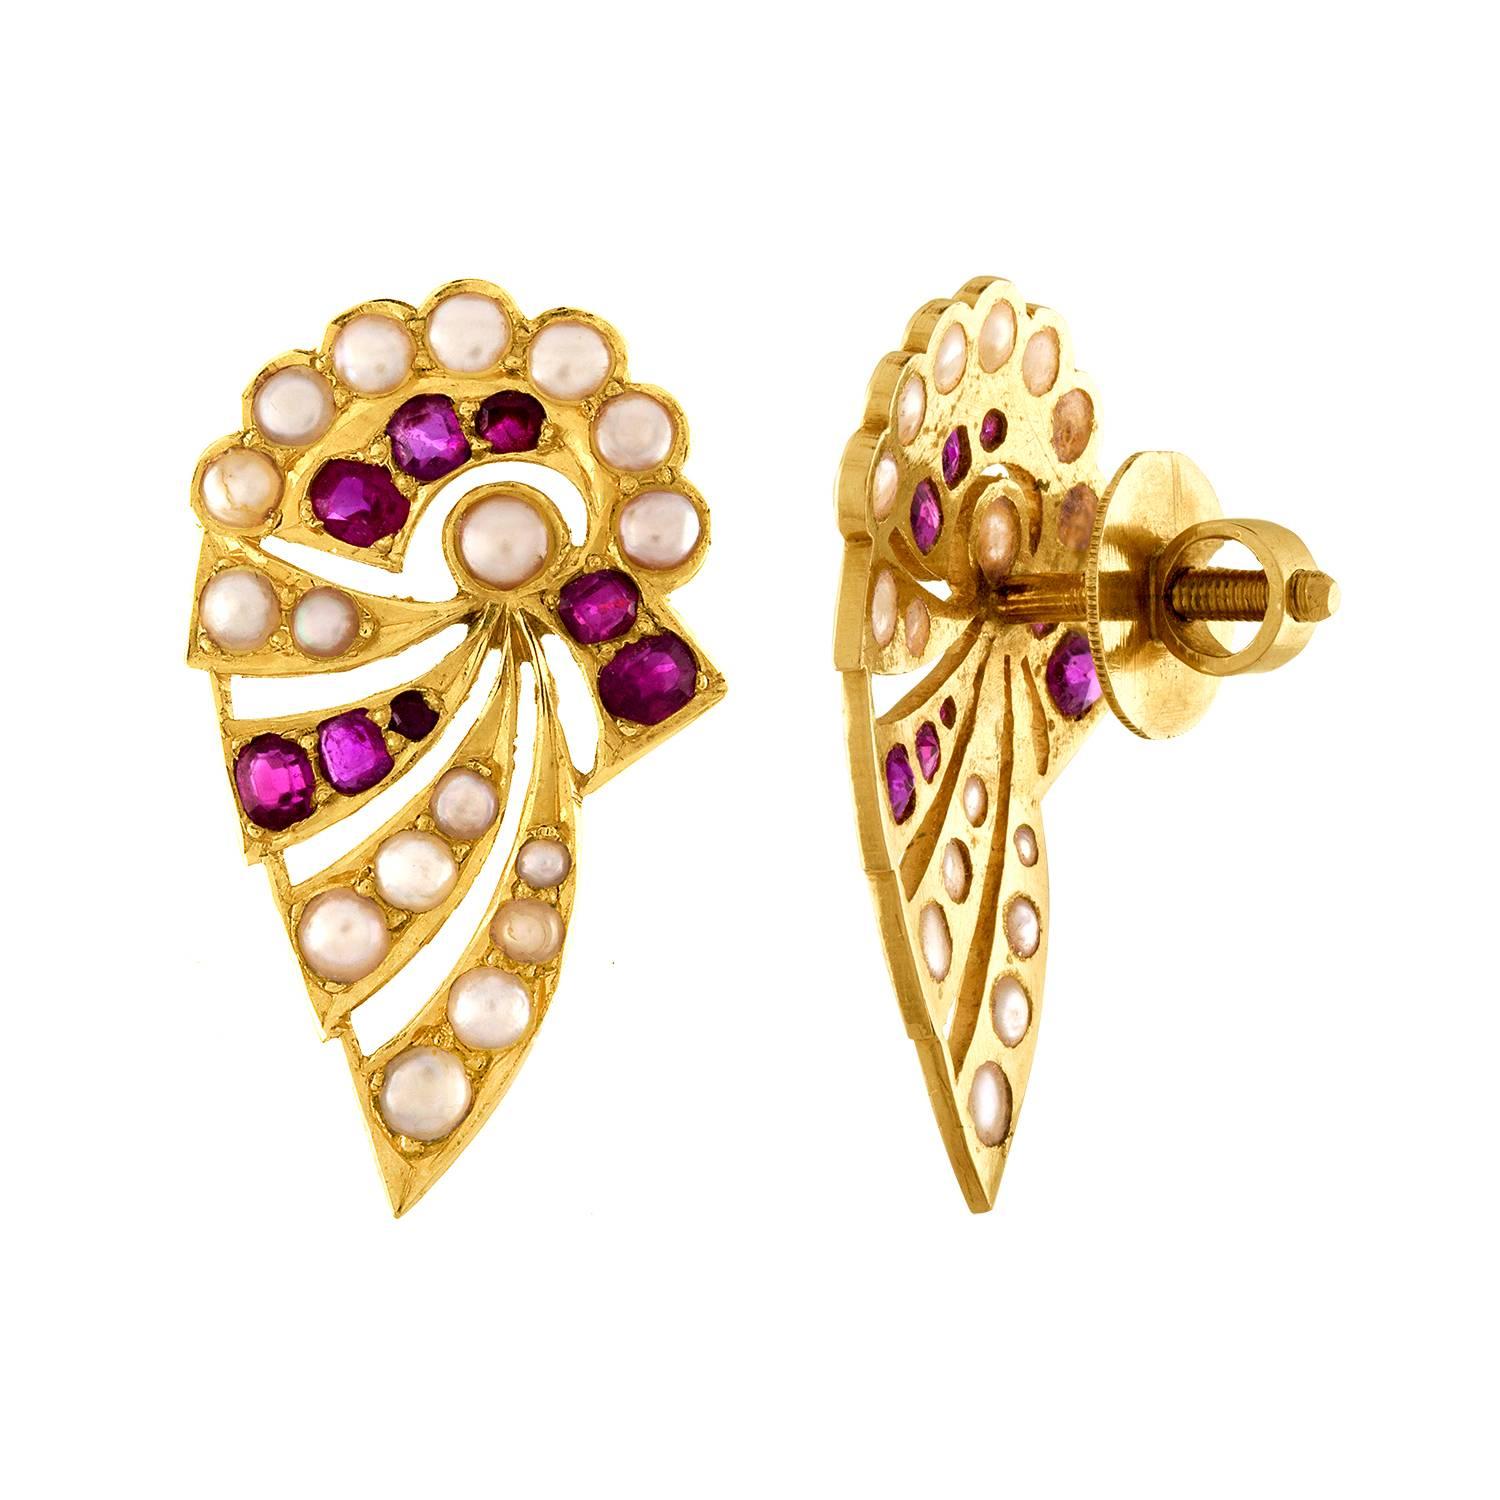 Beautiful & Delicate Earrings
The earrings are 18K Rose Gold
There are about 0.70 Carats in Burma Rubies.
The earrings have 34 small pearls
The earrings are screwbacks.
The earrings measure approximately 1.25